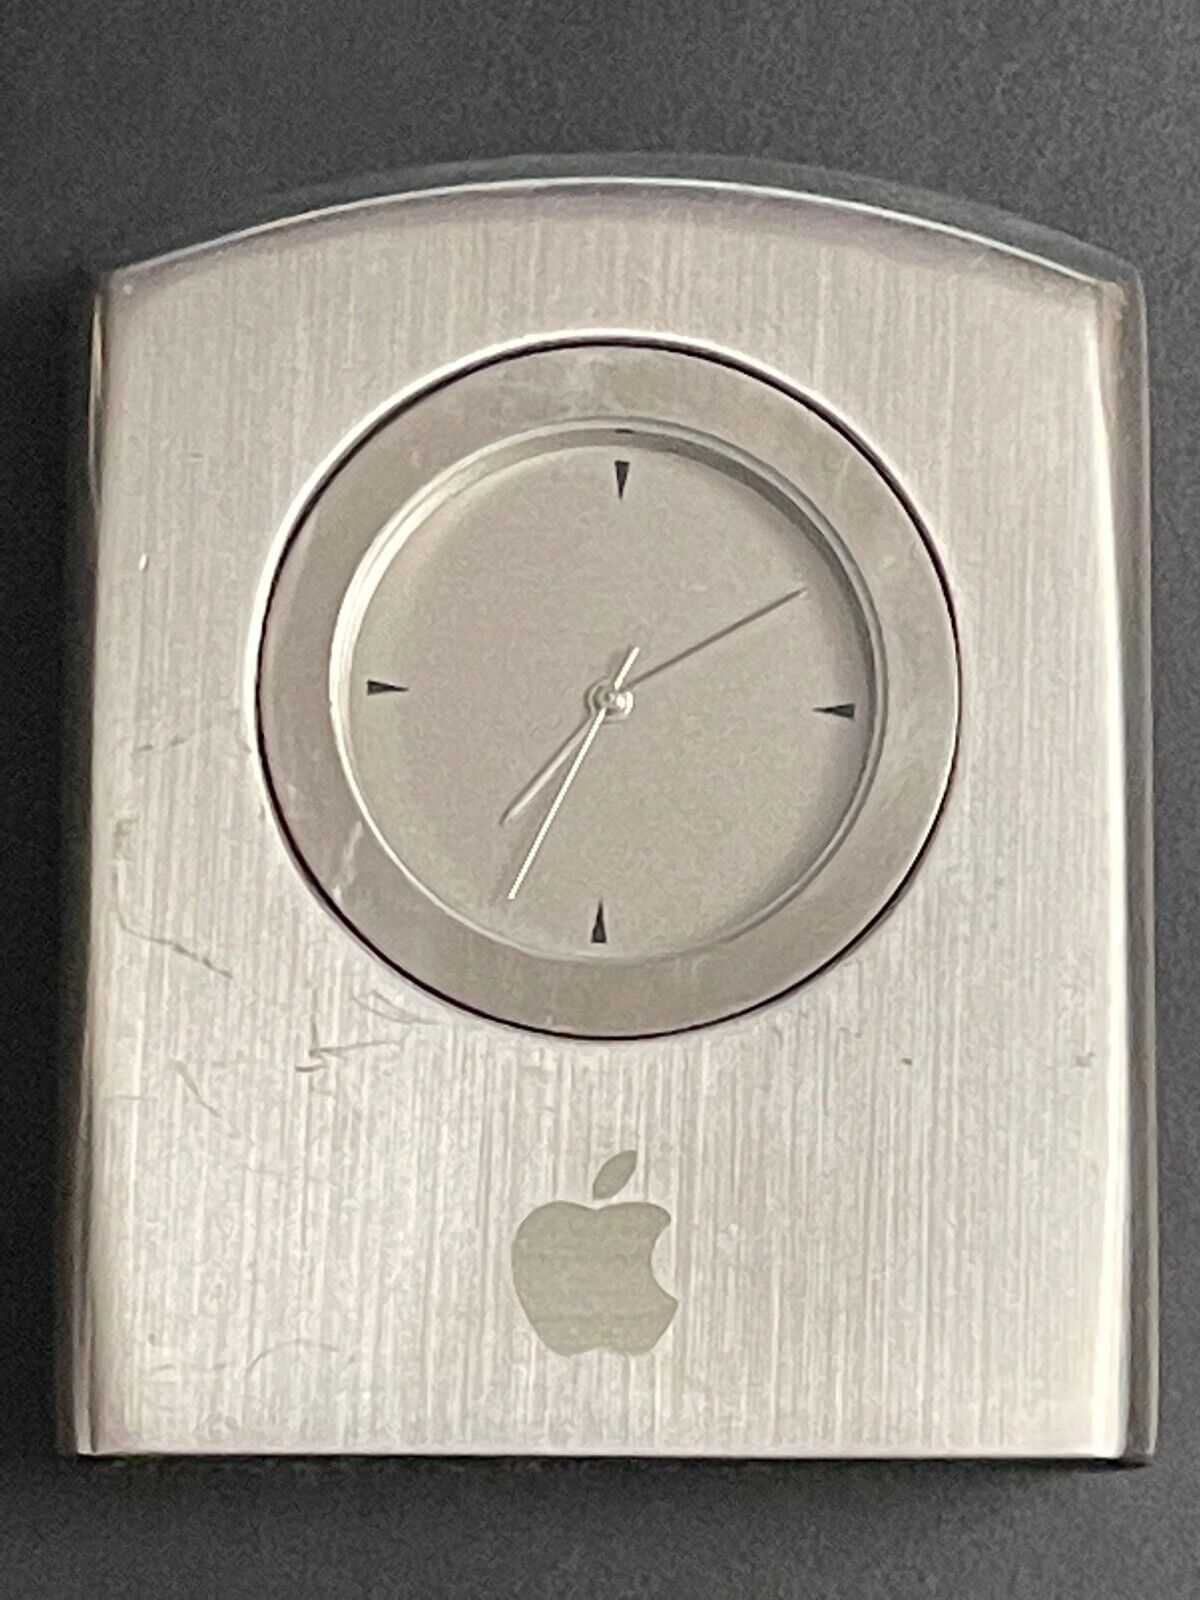 VINTAGE & RARE Apple employees edition stainless steel Travel Desk Clock 2004